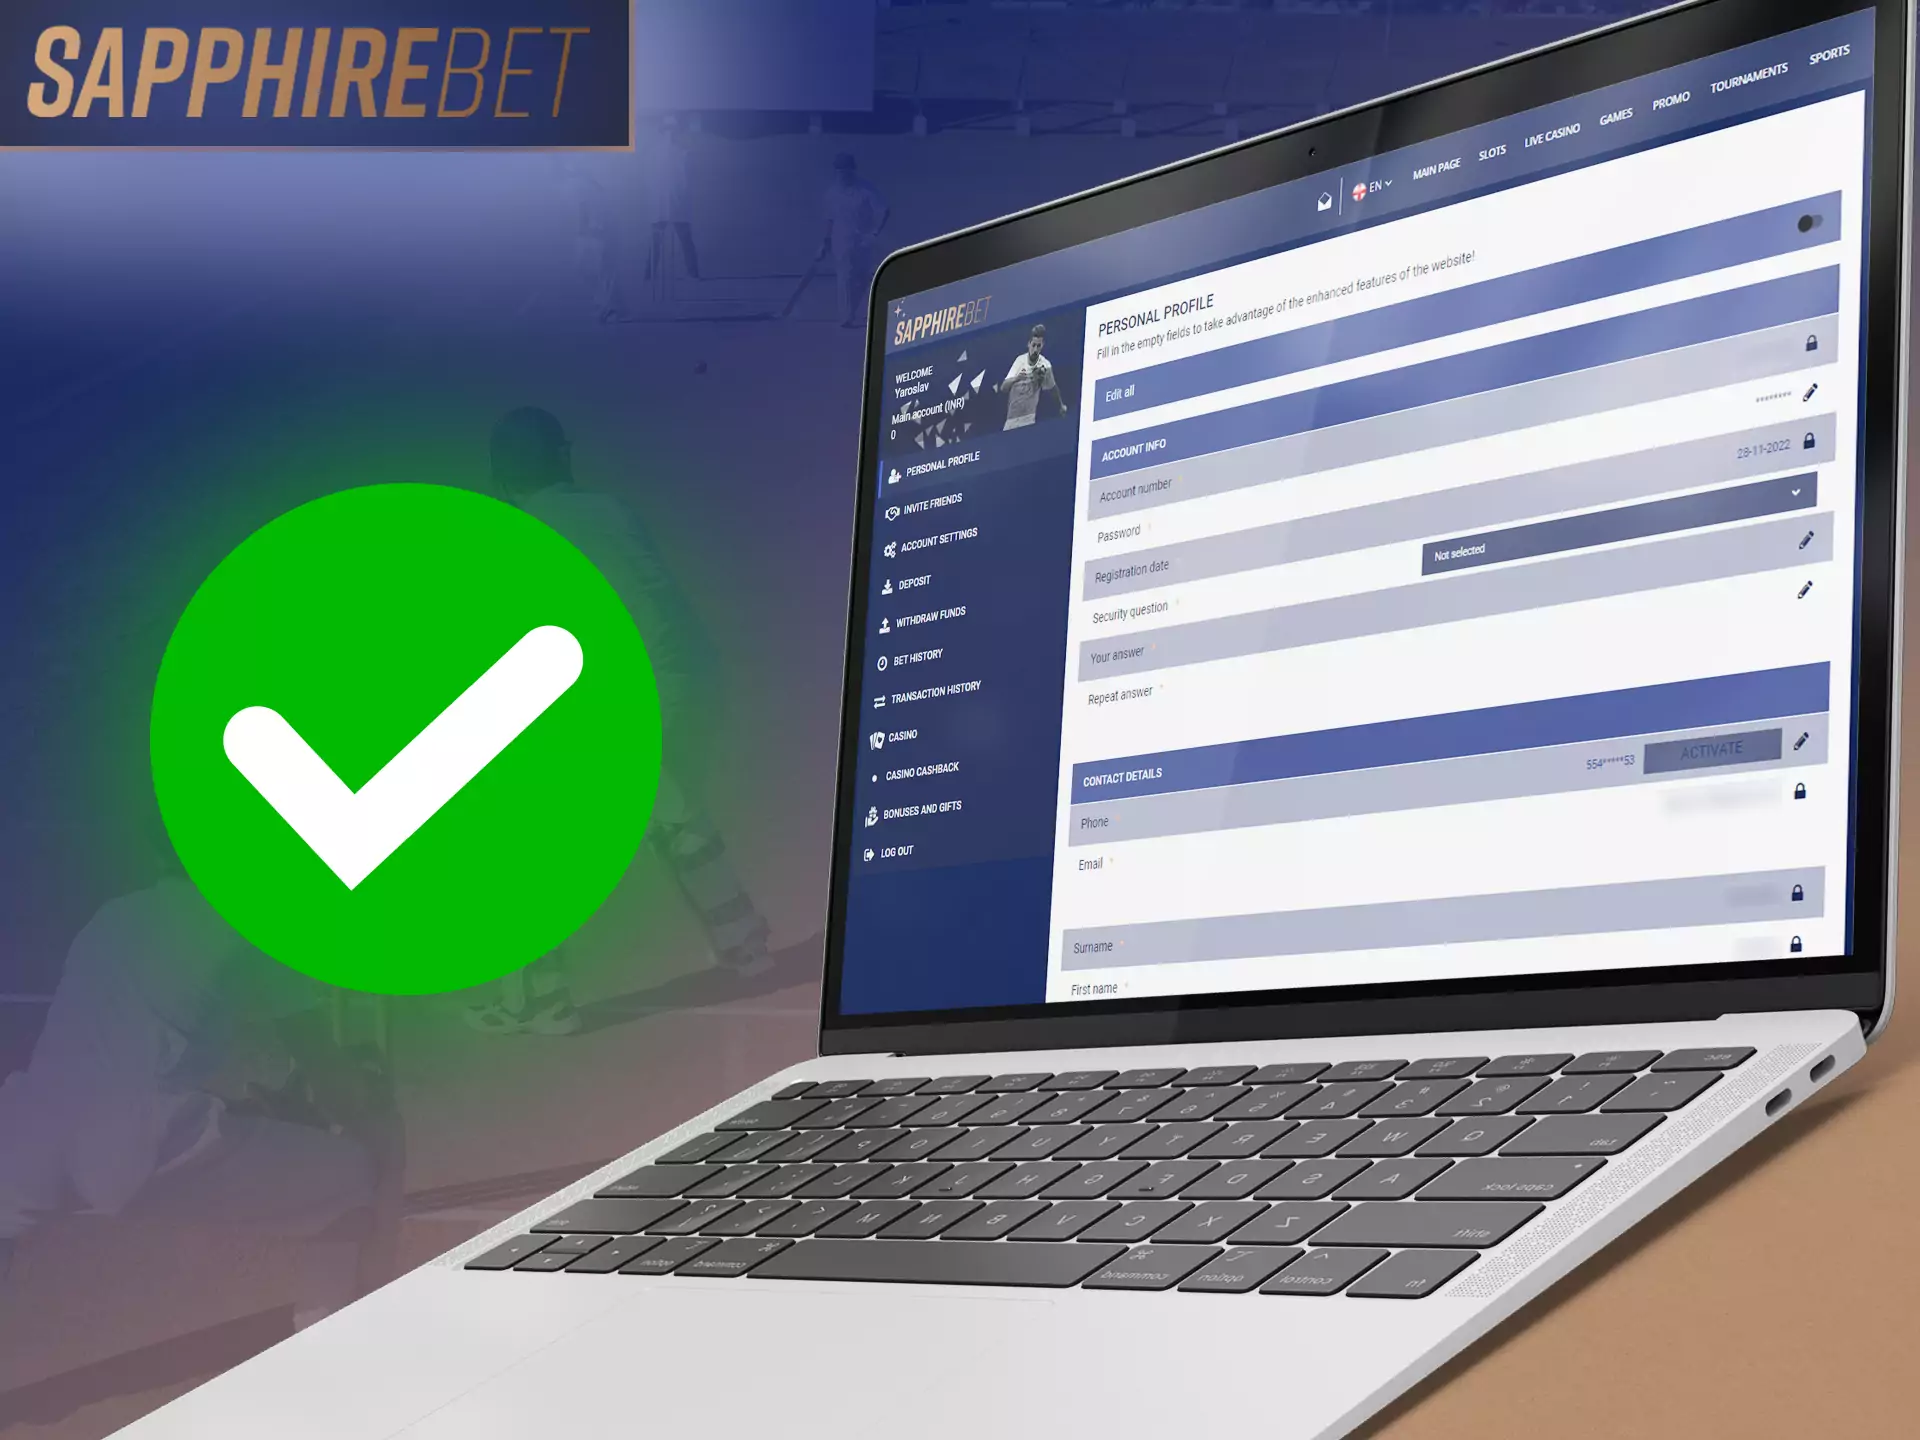 Go through a simple verification of Sapphirebet, confirm your identity, get all the benefits of the service.